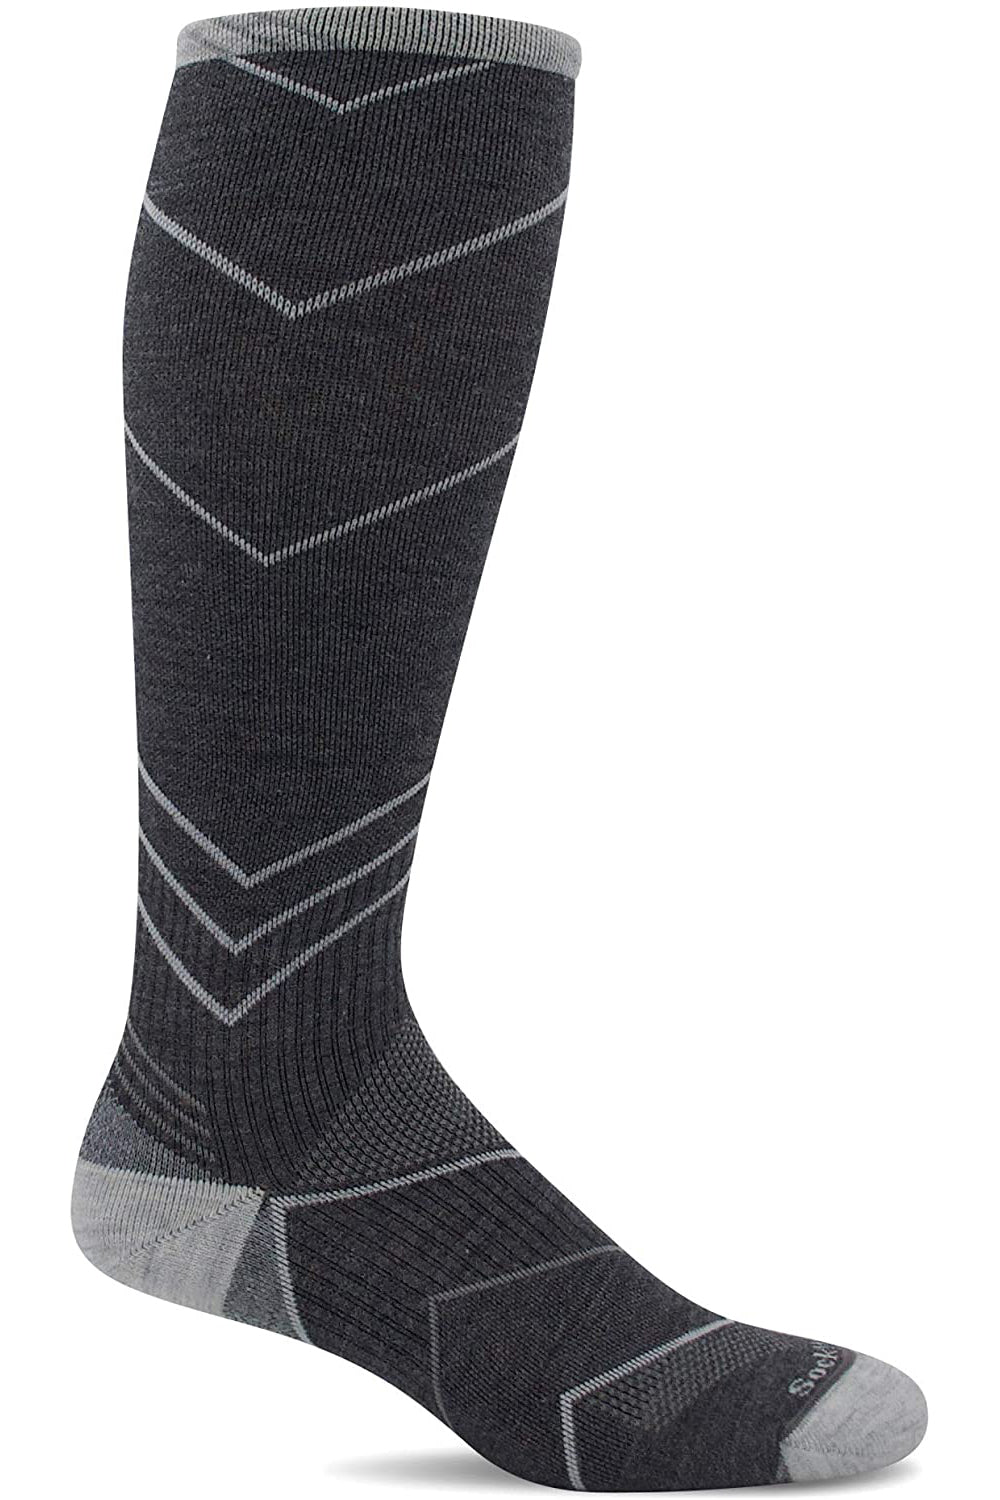 Sockwell Men's Incline Over-The-Calf Moderate Graduated Compression Sock in Deep Charcoal color from the side